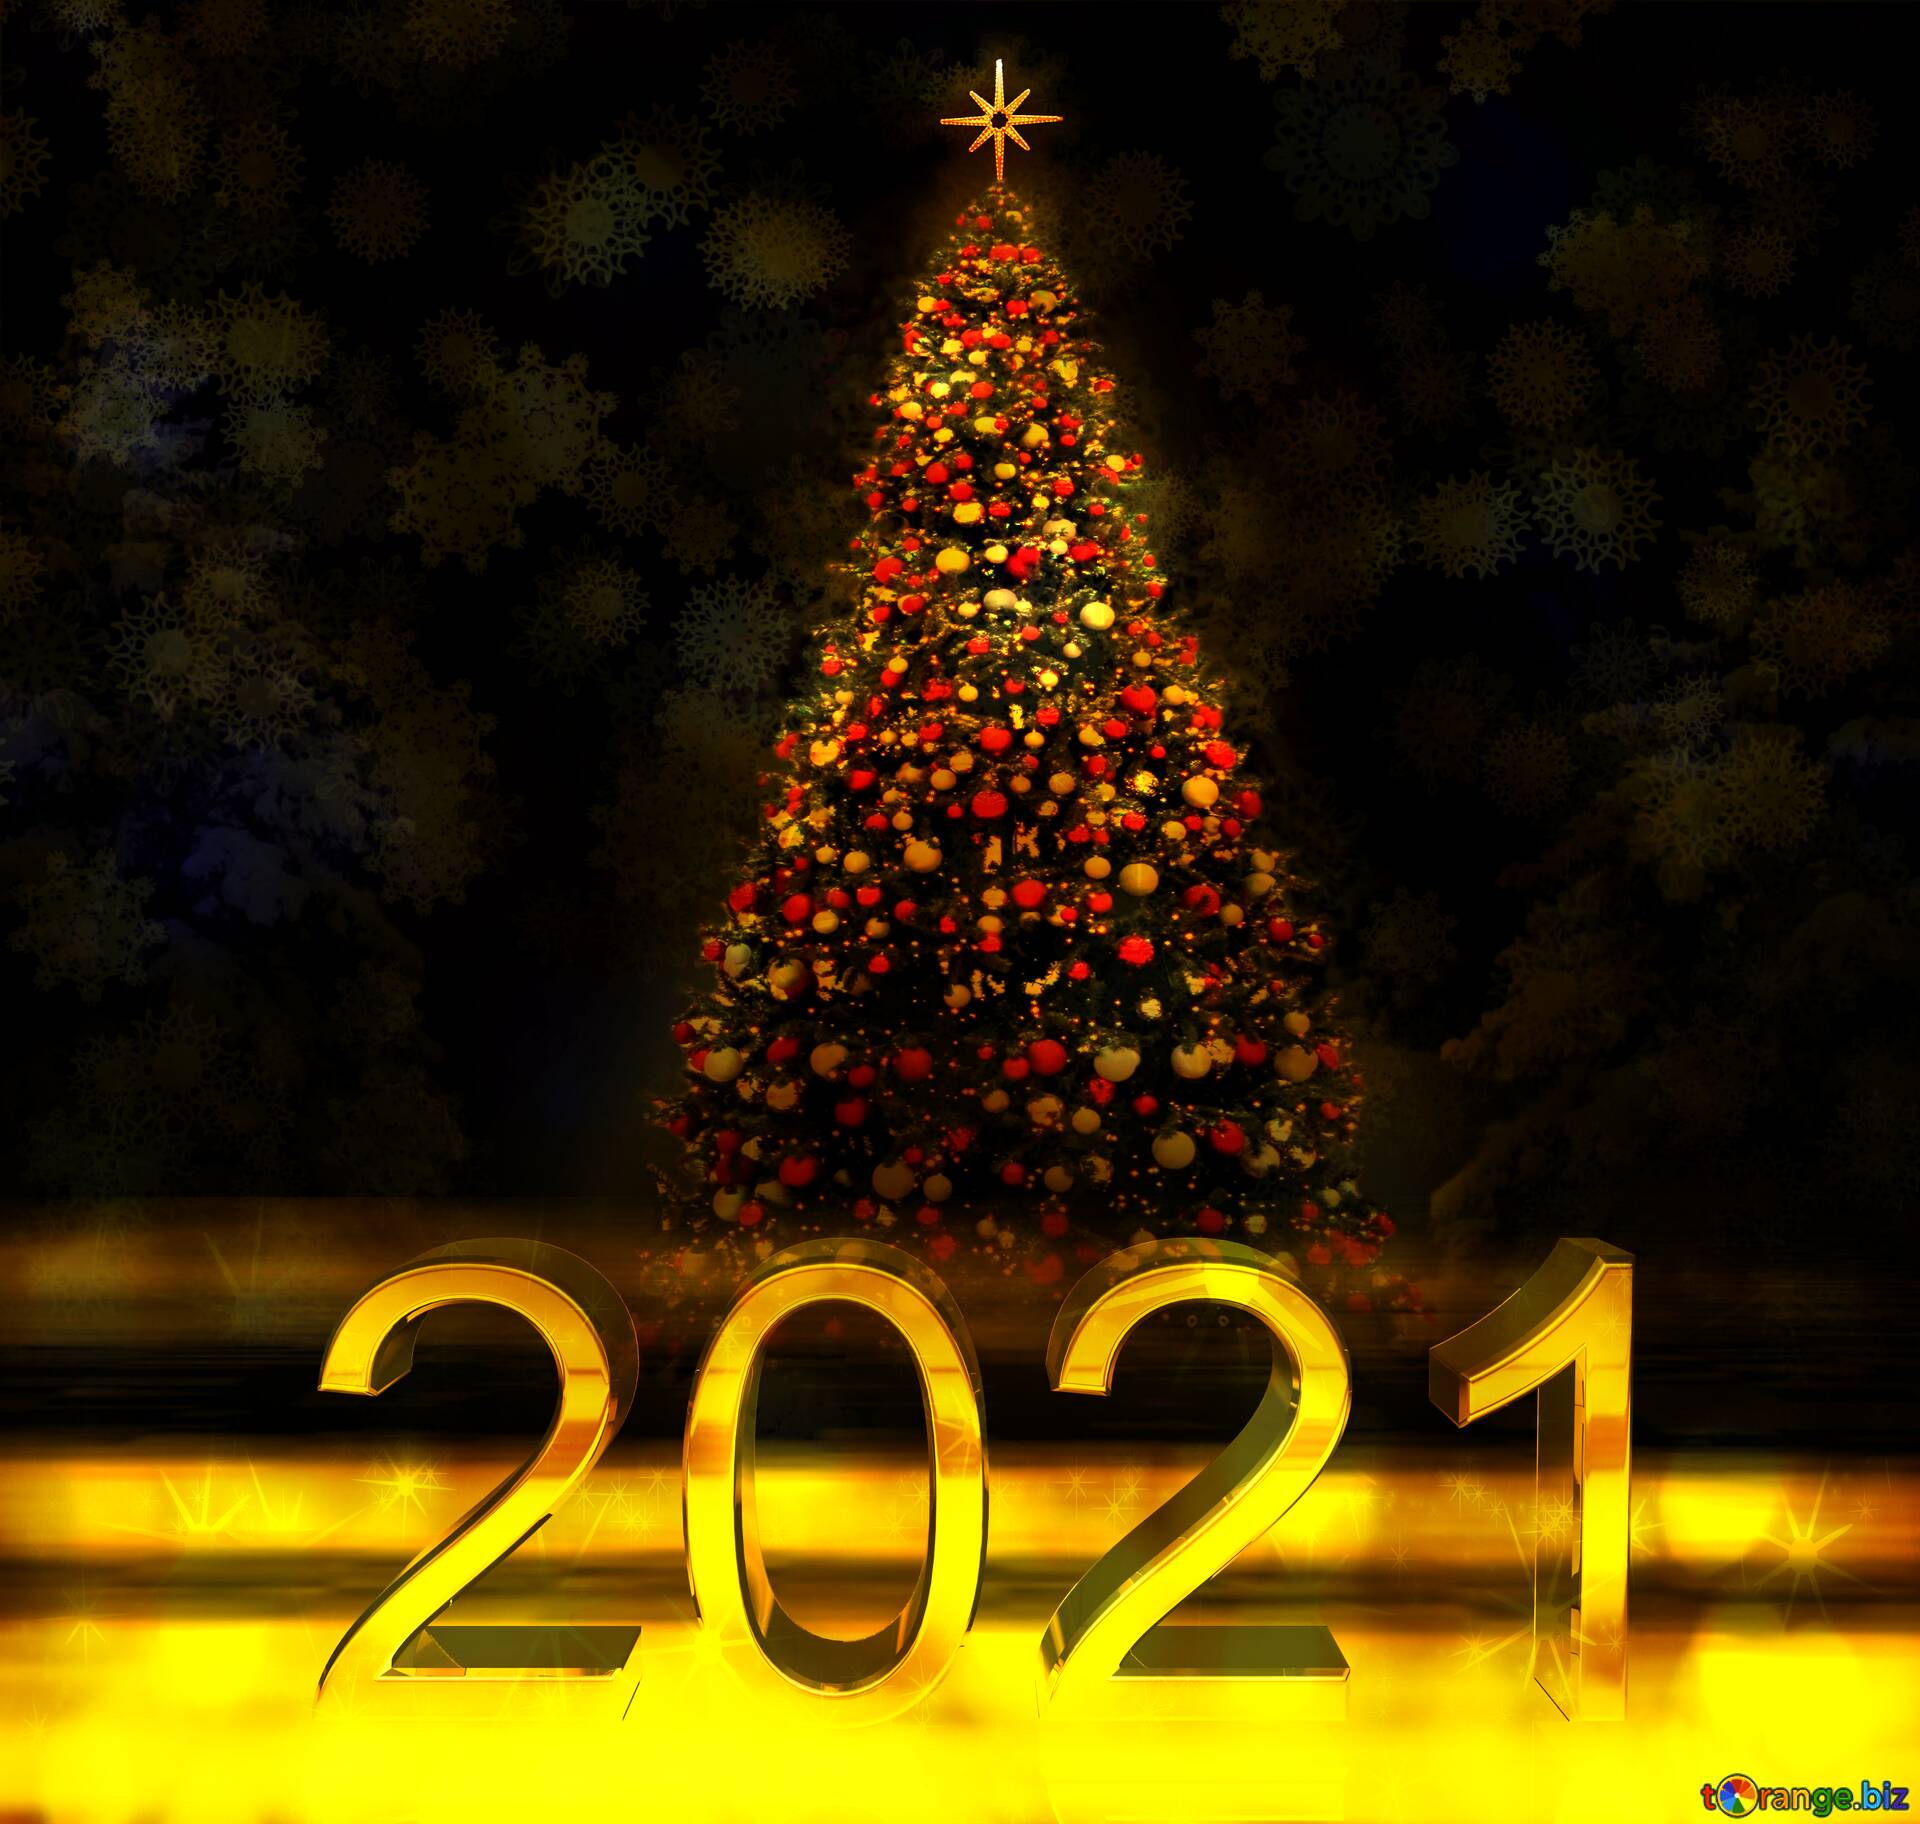 Download Free Picture Christmas Tree 2021 On CC BY License Free Image Stock TOrange.biz Fx №216469